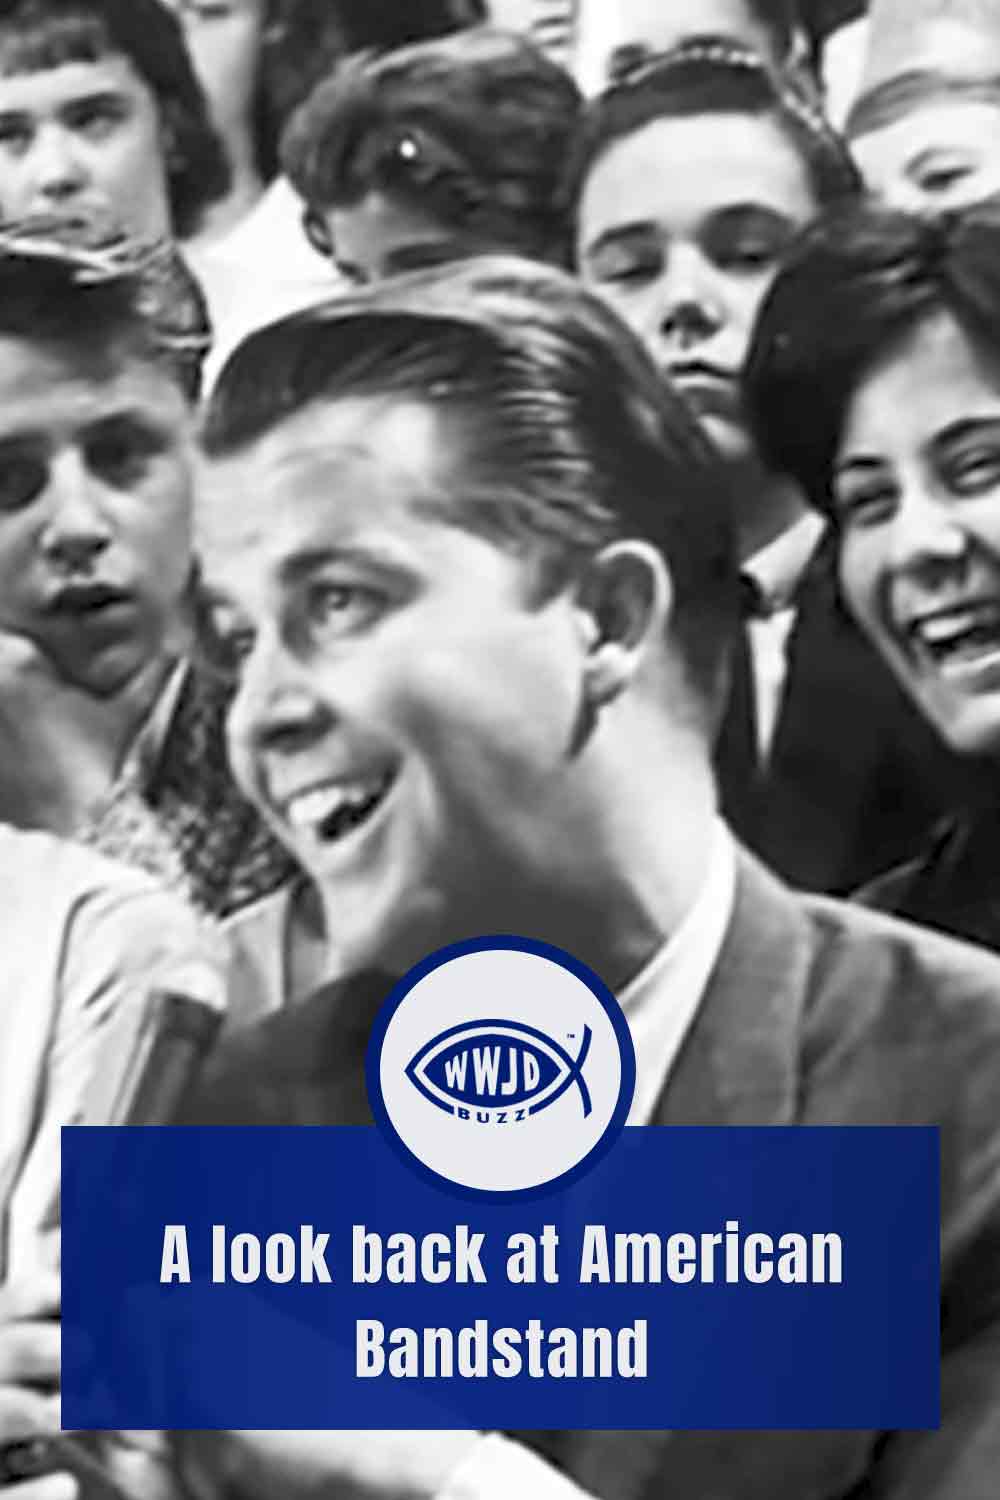 A look back at American Bandstand